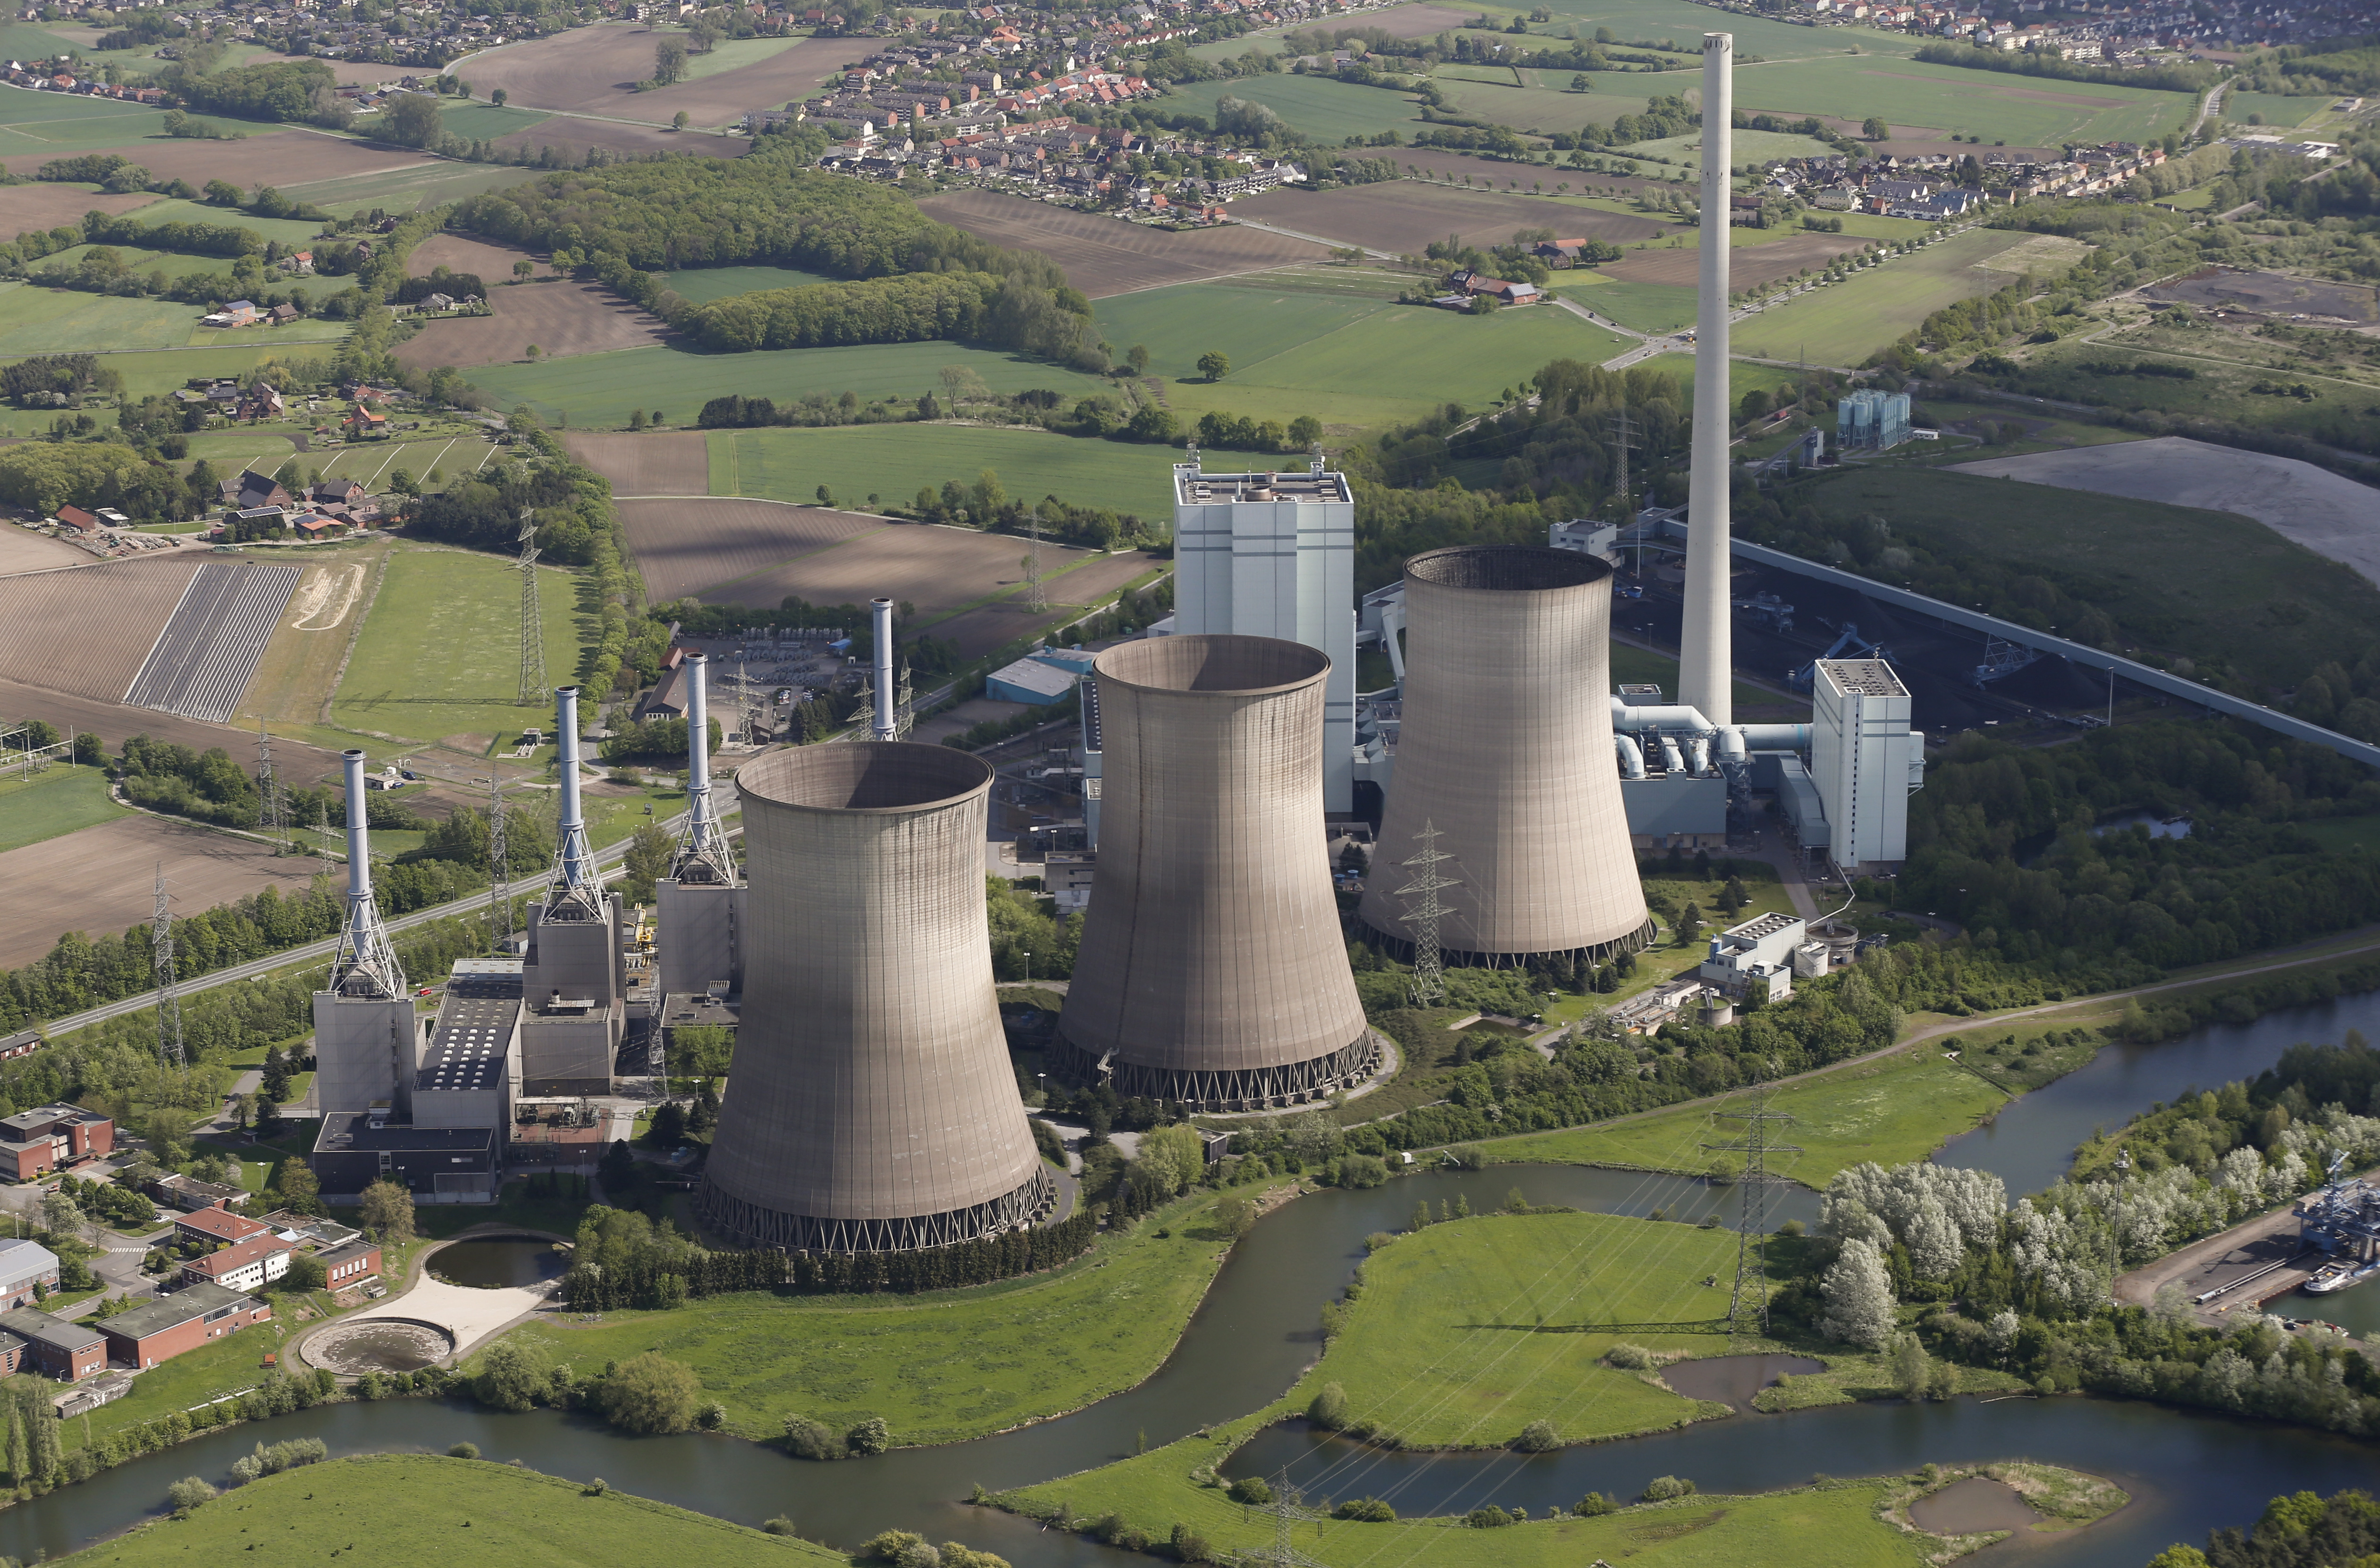 An aerial picture shows the four natural-gas power plants "Gersteinwerk" of Germany's RWE Power near the western German city of Hamm